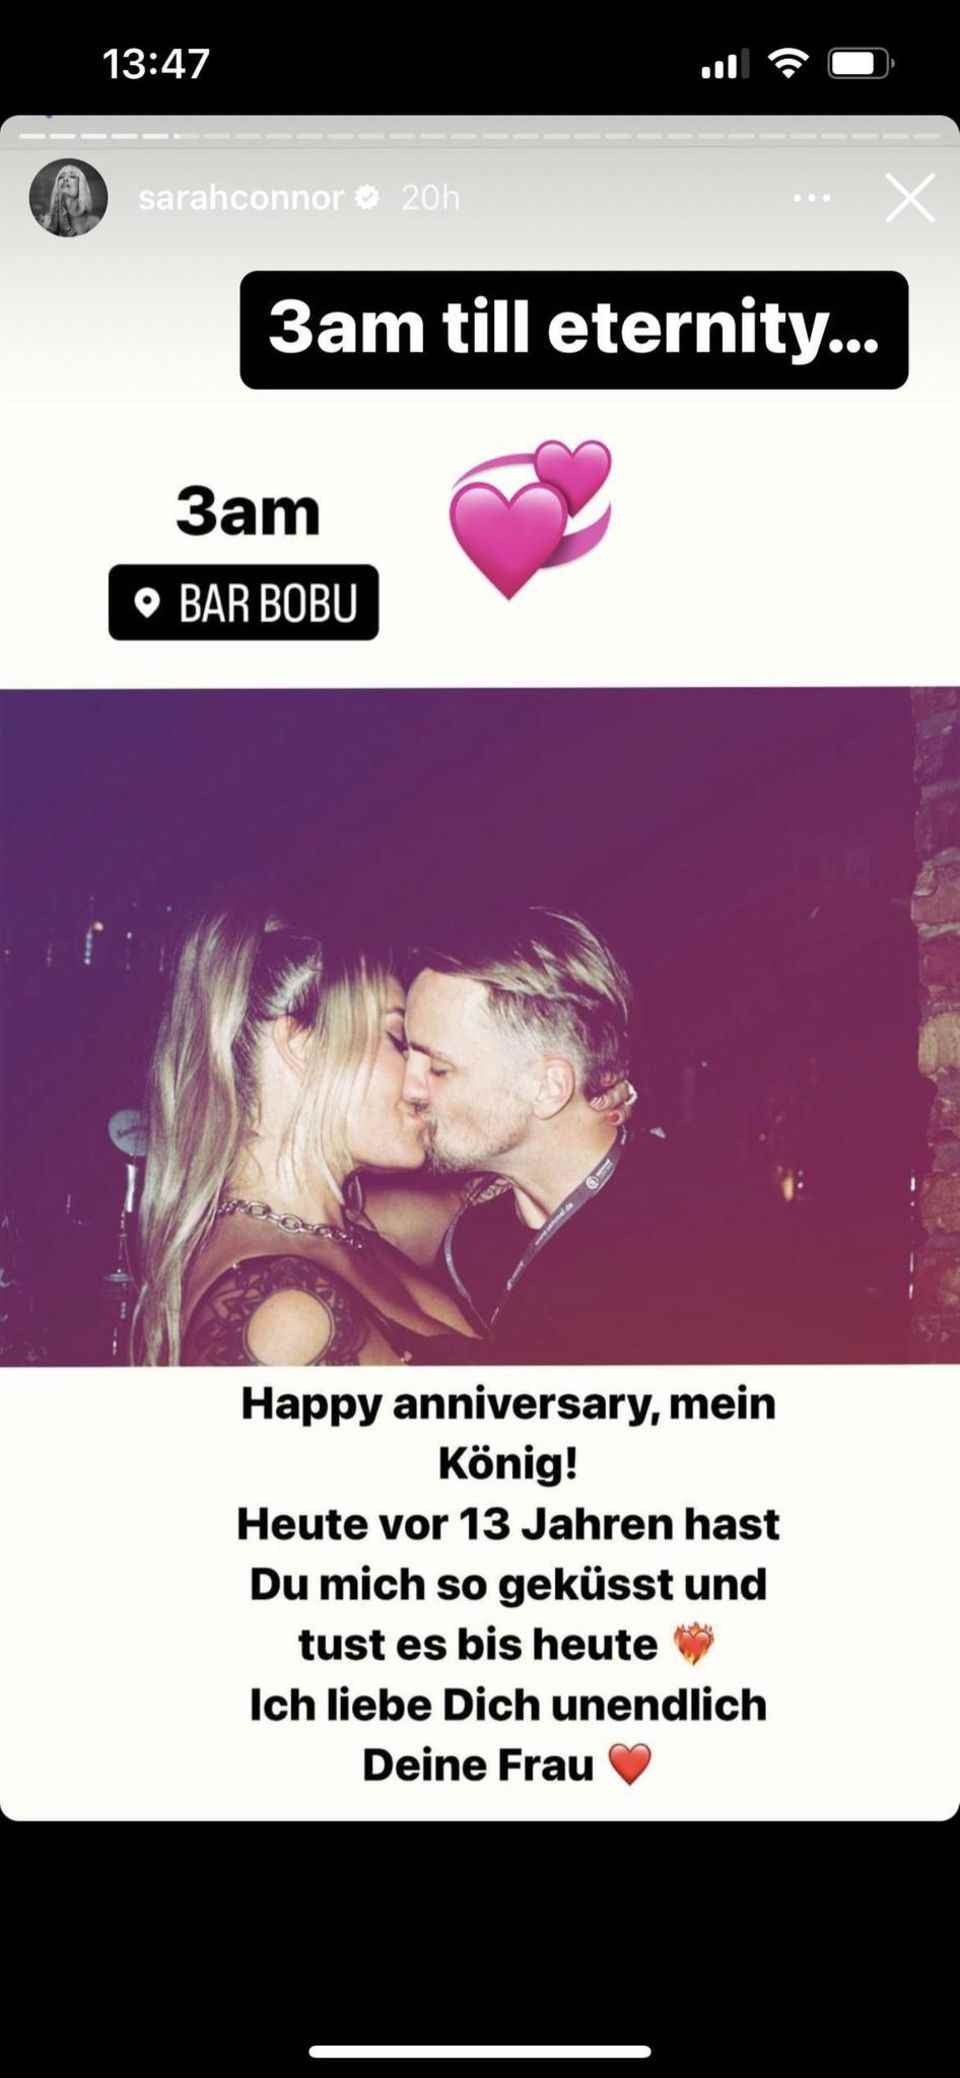 Sarah Connor: The singer shares the first kissing photo with her Florian on her 13th anniversary